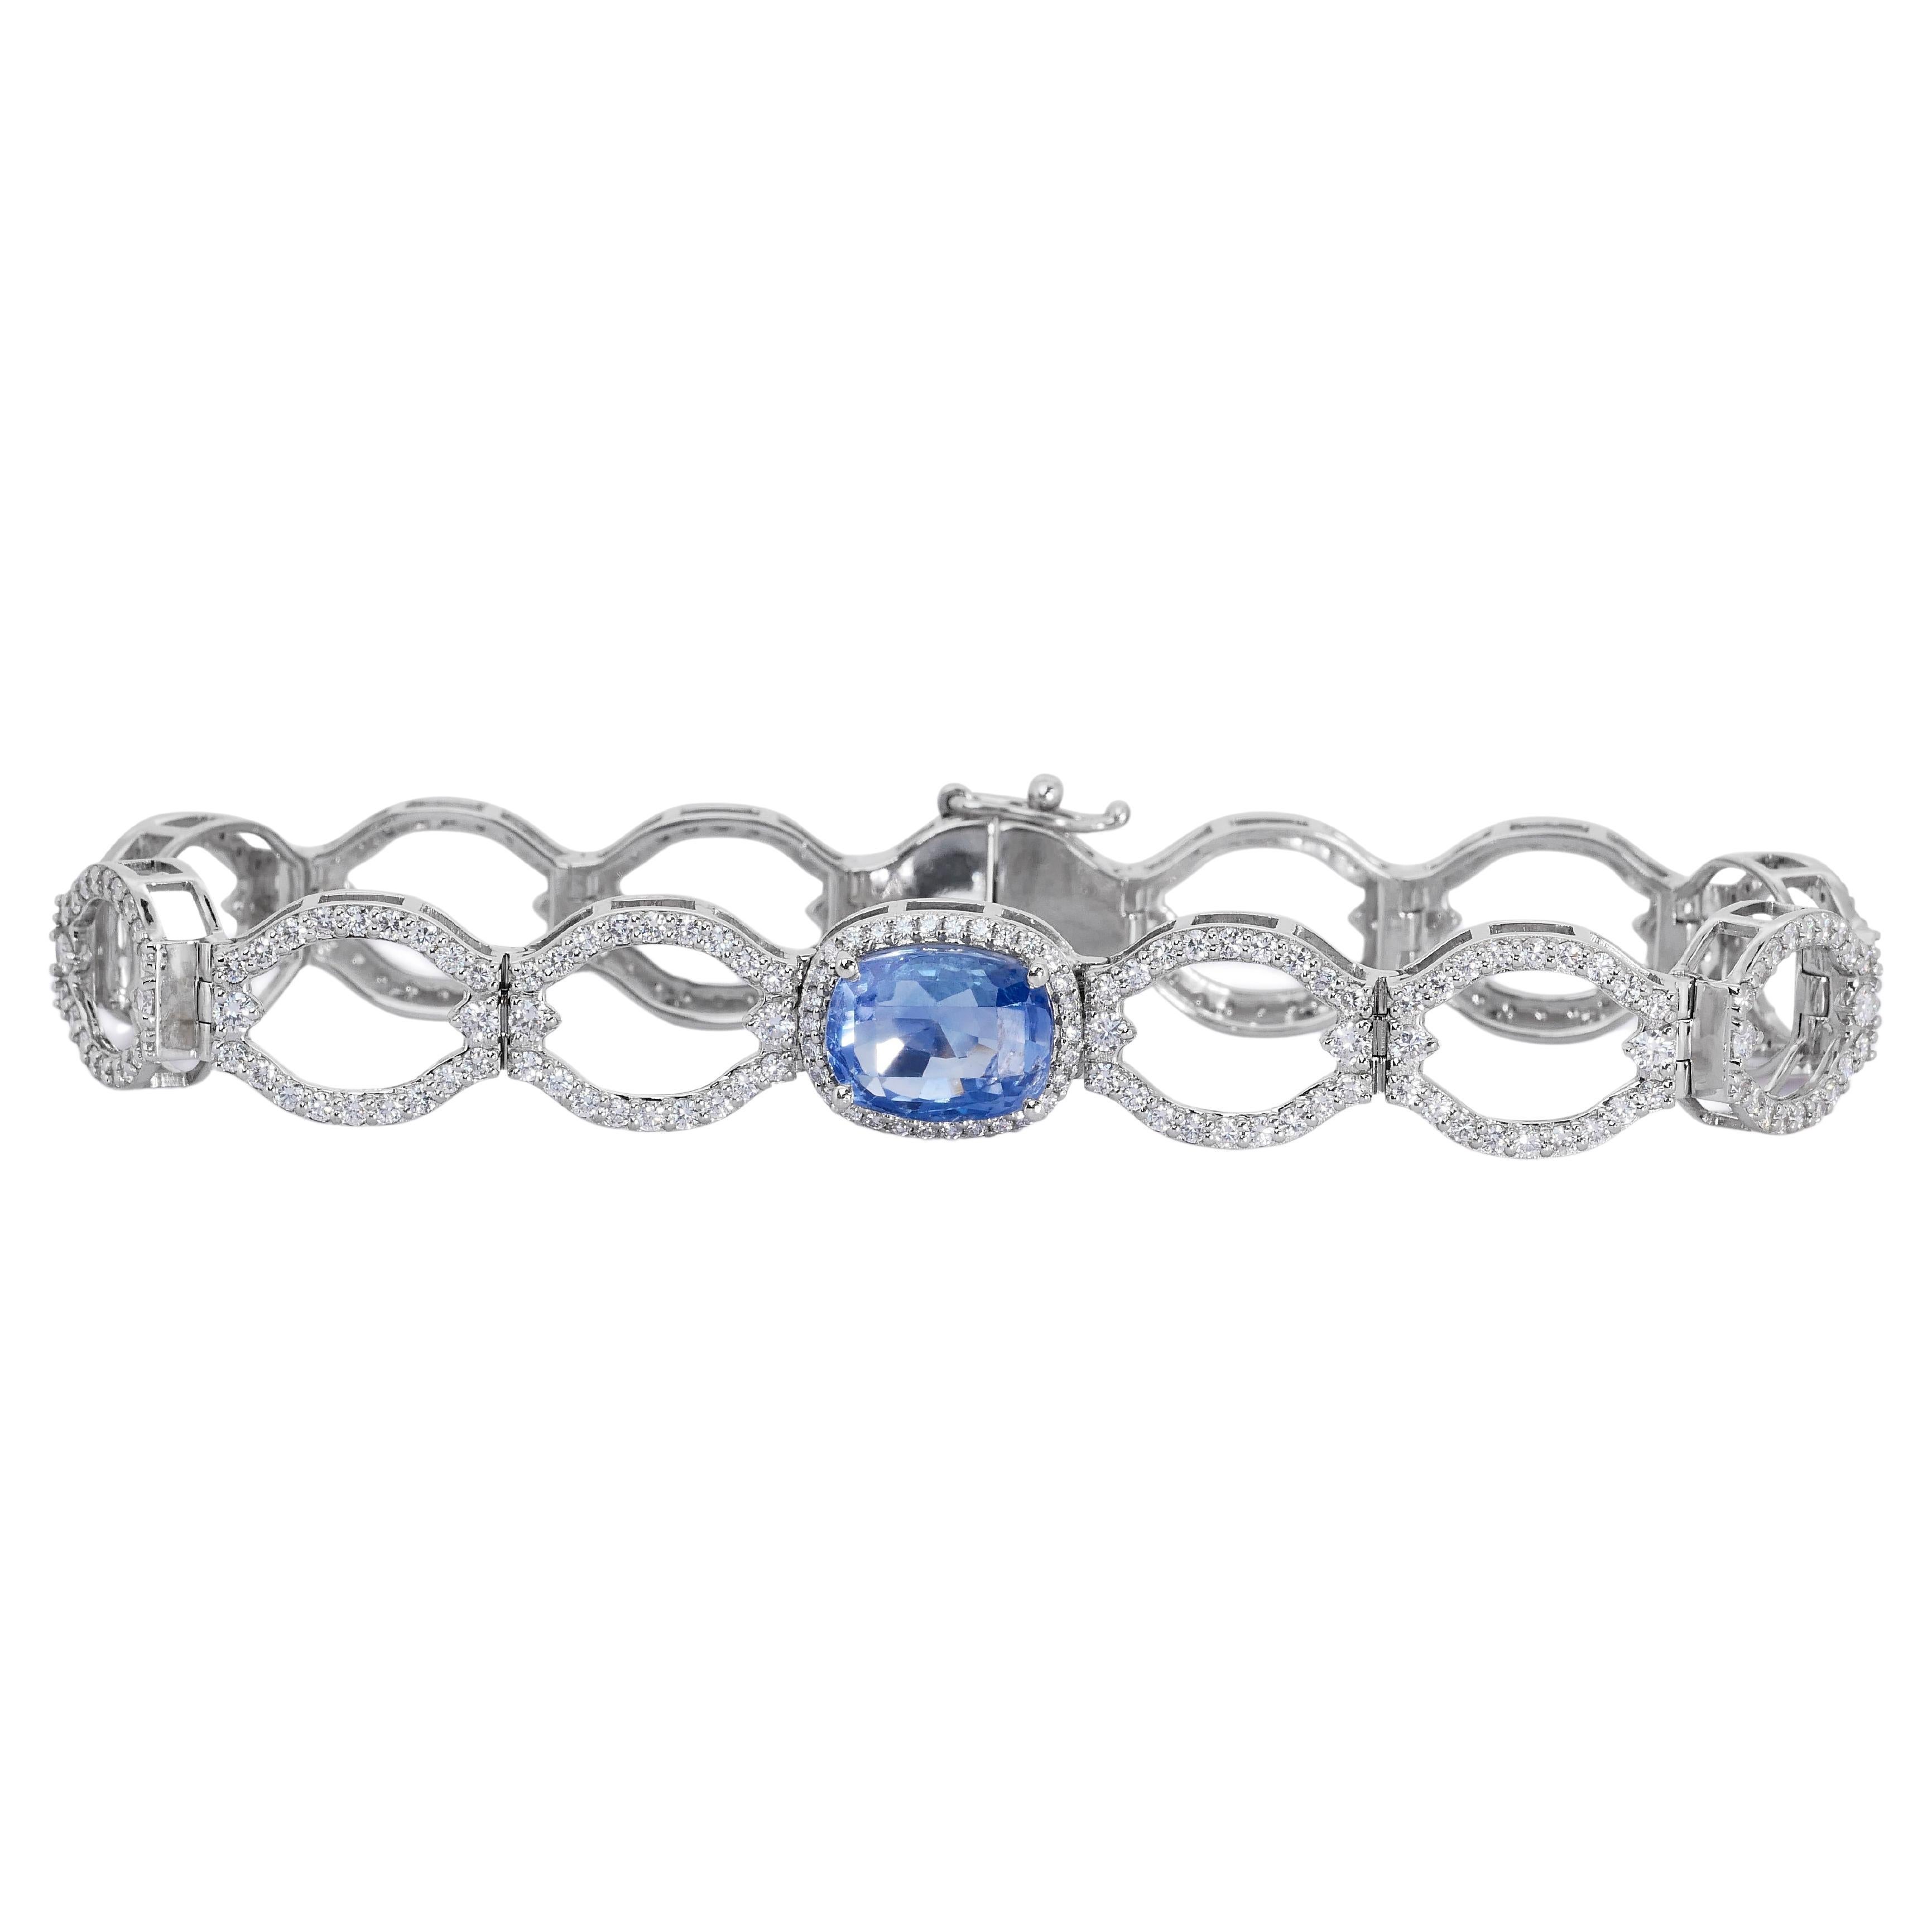 14k White Gold Bracelet w/ 9.72ct Natural Sapphire and Natural Diamonds GIA Cert For Sale